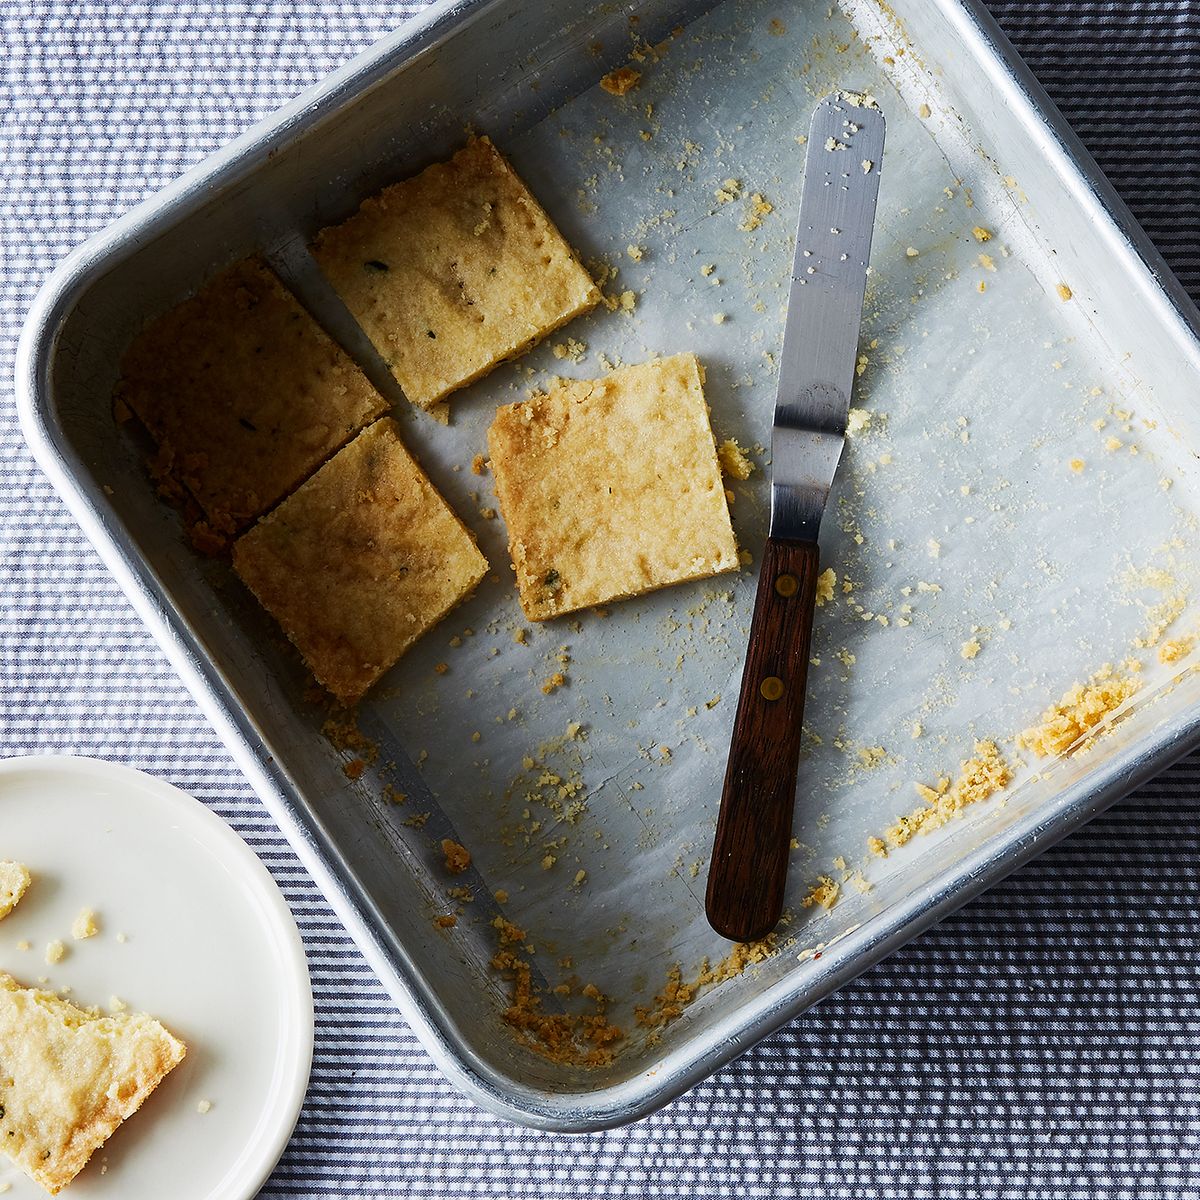 Deb Perelman's Olive Oil Shortbread with Rosemary & Chocolate Chunks